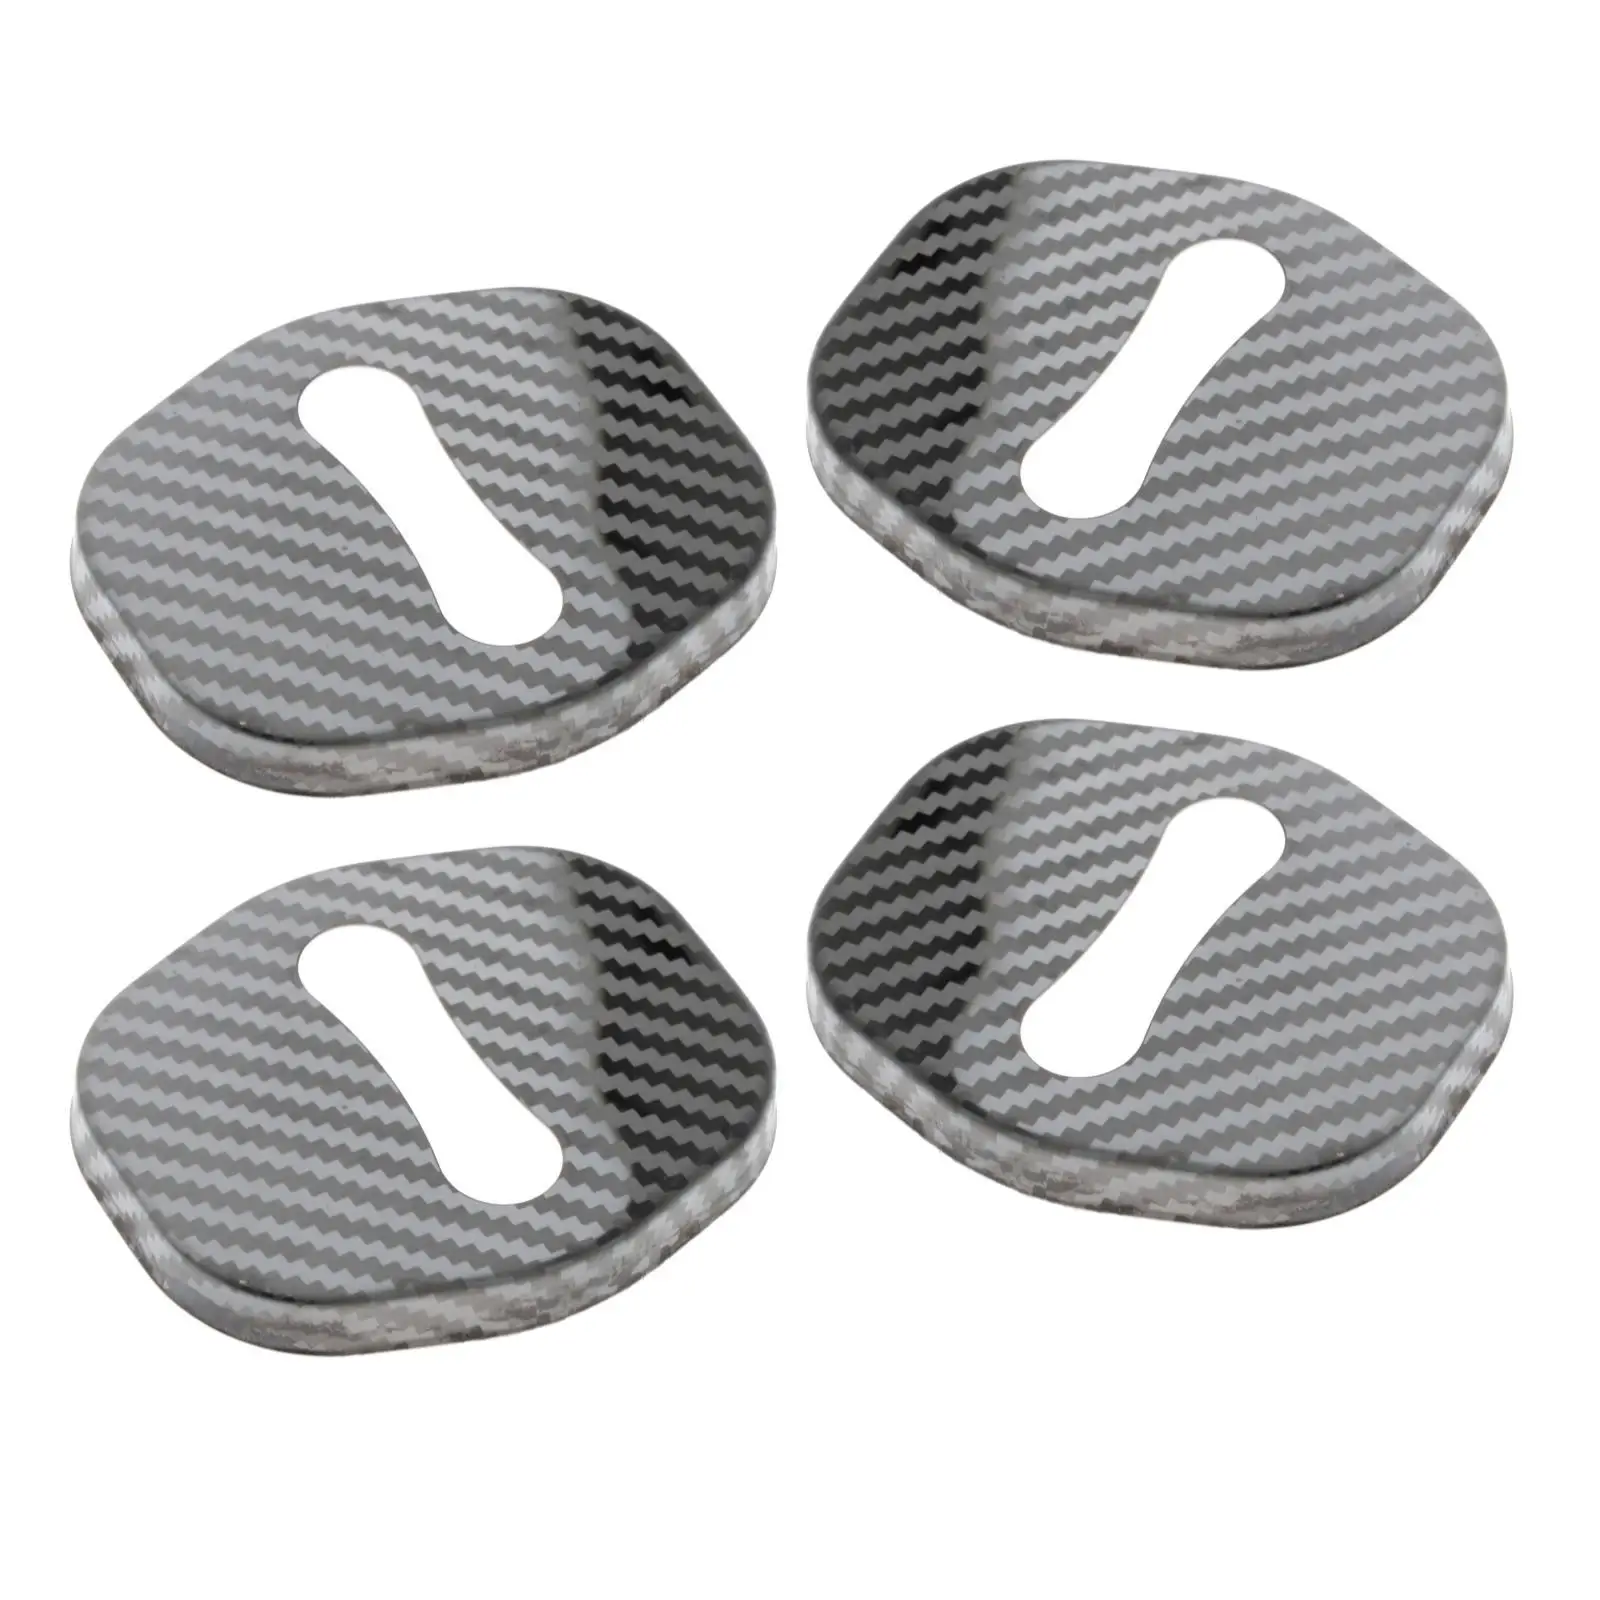 4Pcs Stainless Steel Car Door Lock latches Cover Protector Metal Trim Interior for Auto